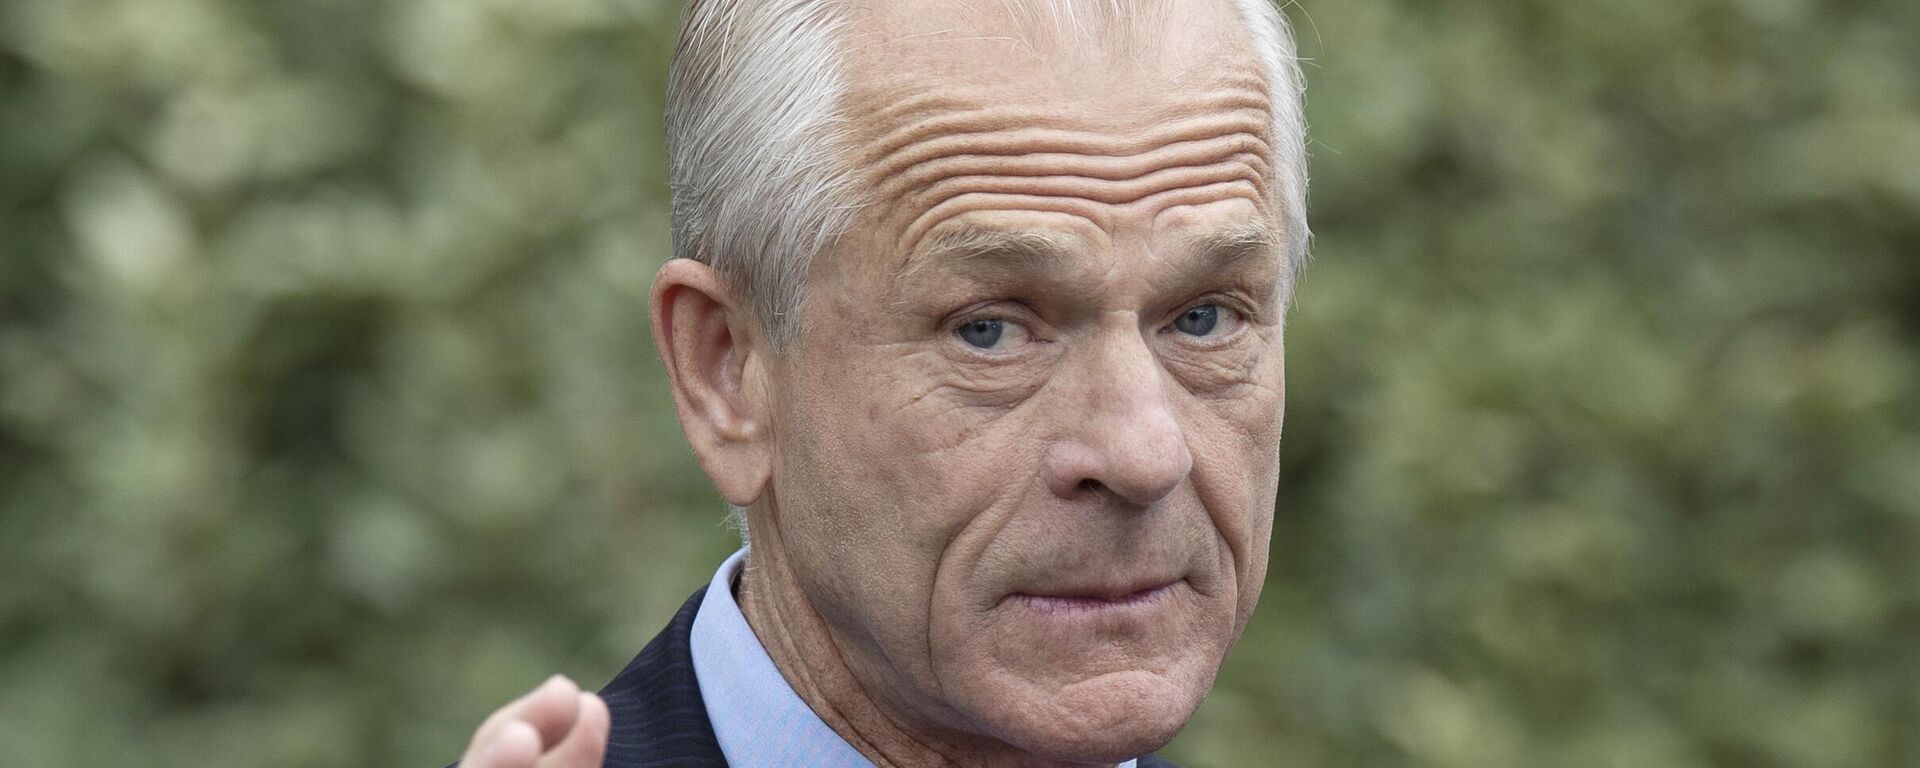 White House trade adviser Peter Navarro speaks with reporters at the White House, June 18, 2020, in Washington. The House committee investigating the Capitol riot has set a vote for next week to consider contempt of Congress charges for two aides of former President Donald Trump. The committee will meet Monday to discuss whether to recommend referring for potential prosecution Trump’s former trade adviser, Peter Navarro, and Dan Scavino, the onetime chief of staff for communications.  - Sputnik International, 1920, 25.03.2022